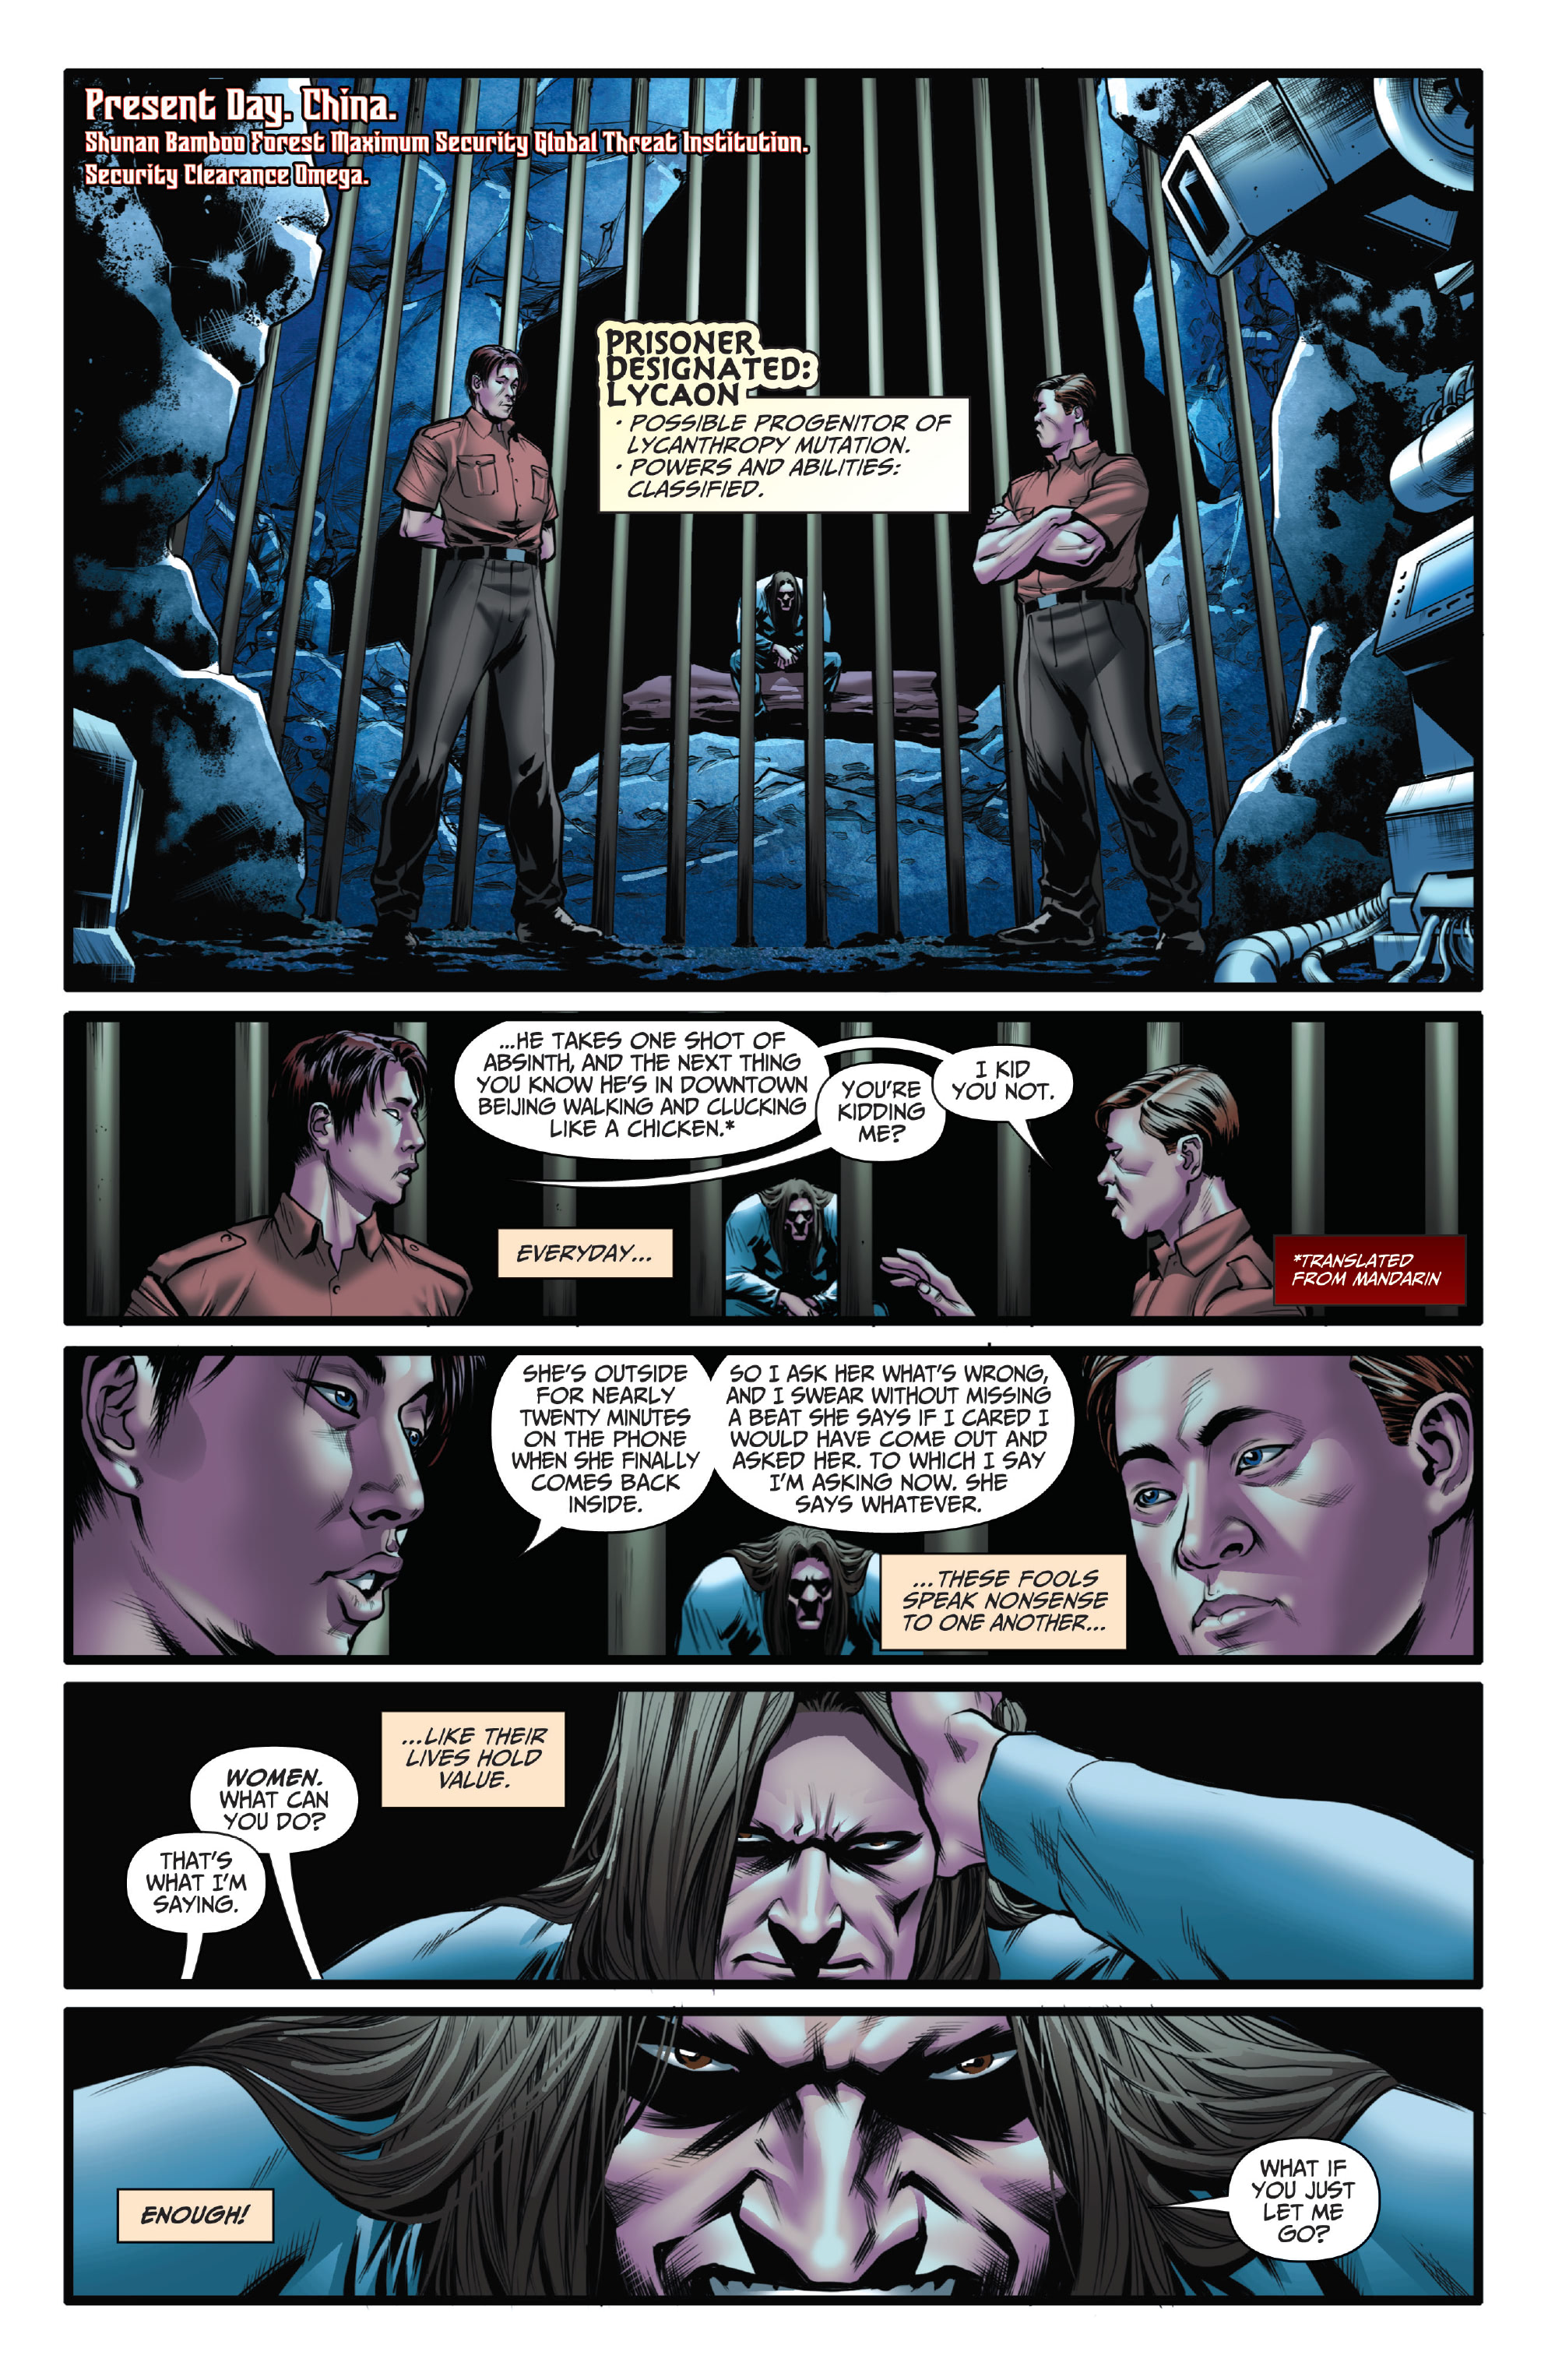 Van Helsing vs The League of Monsters (2020-): Chapter 1 - Page 3